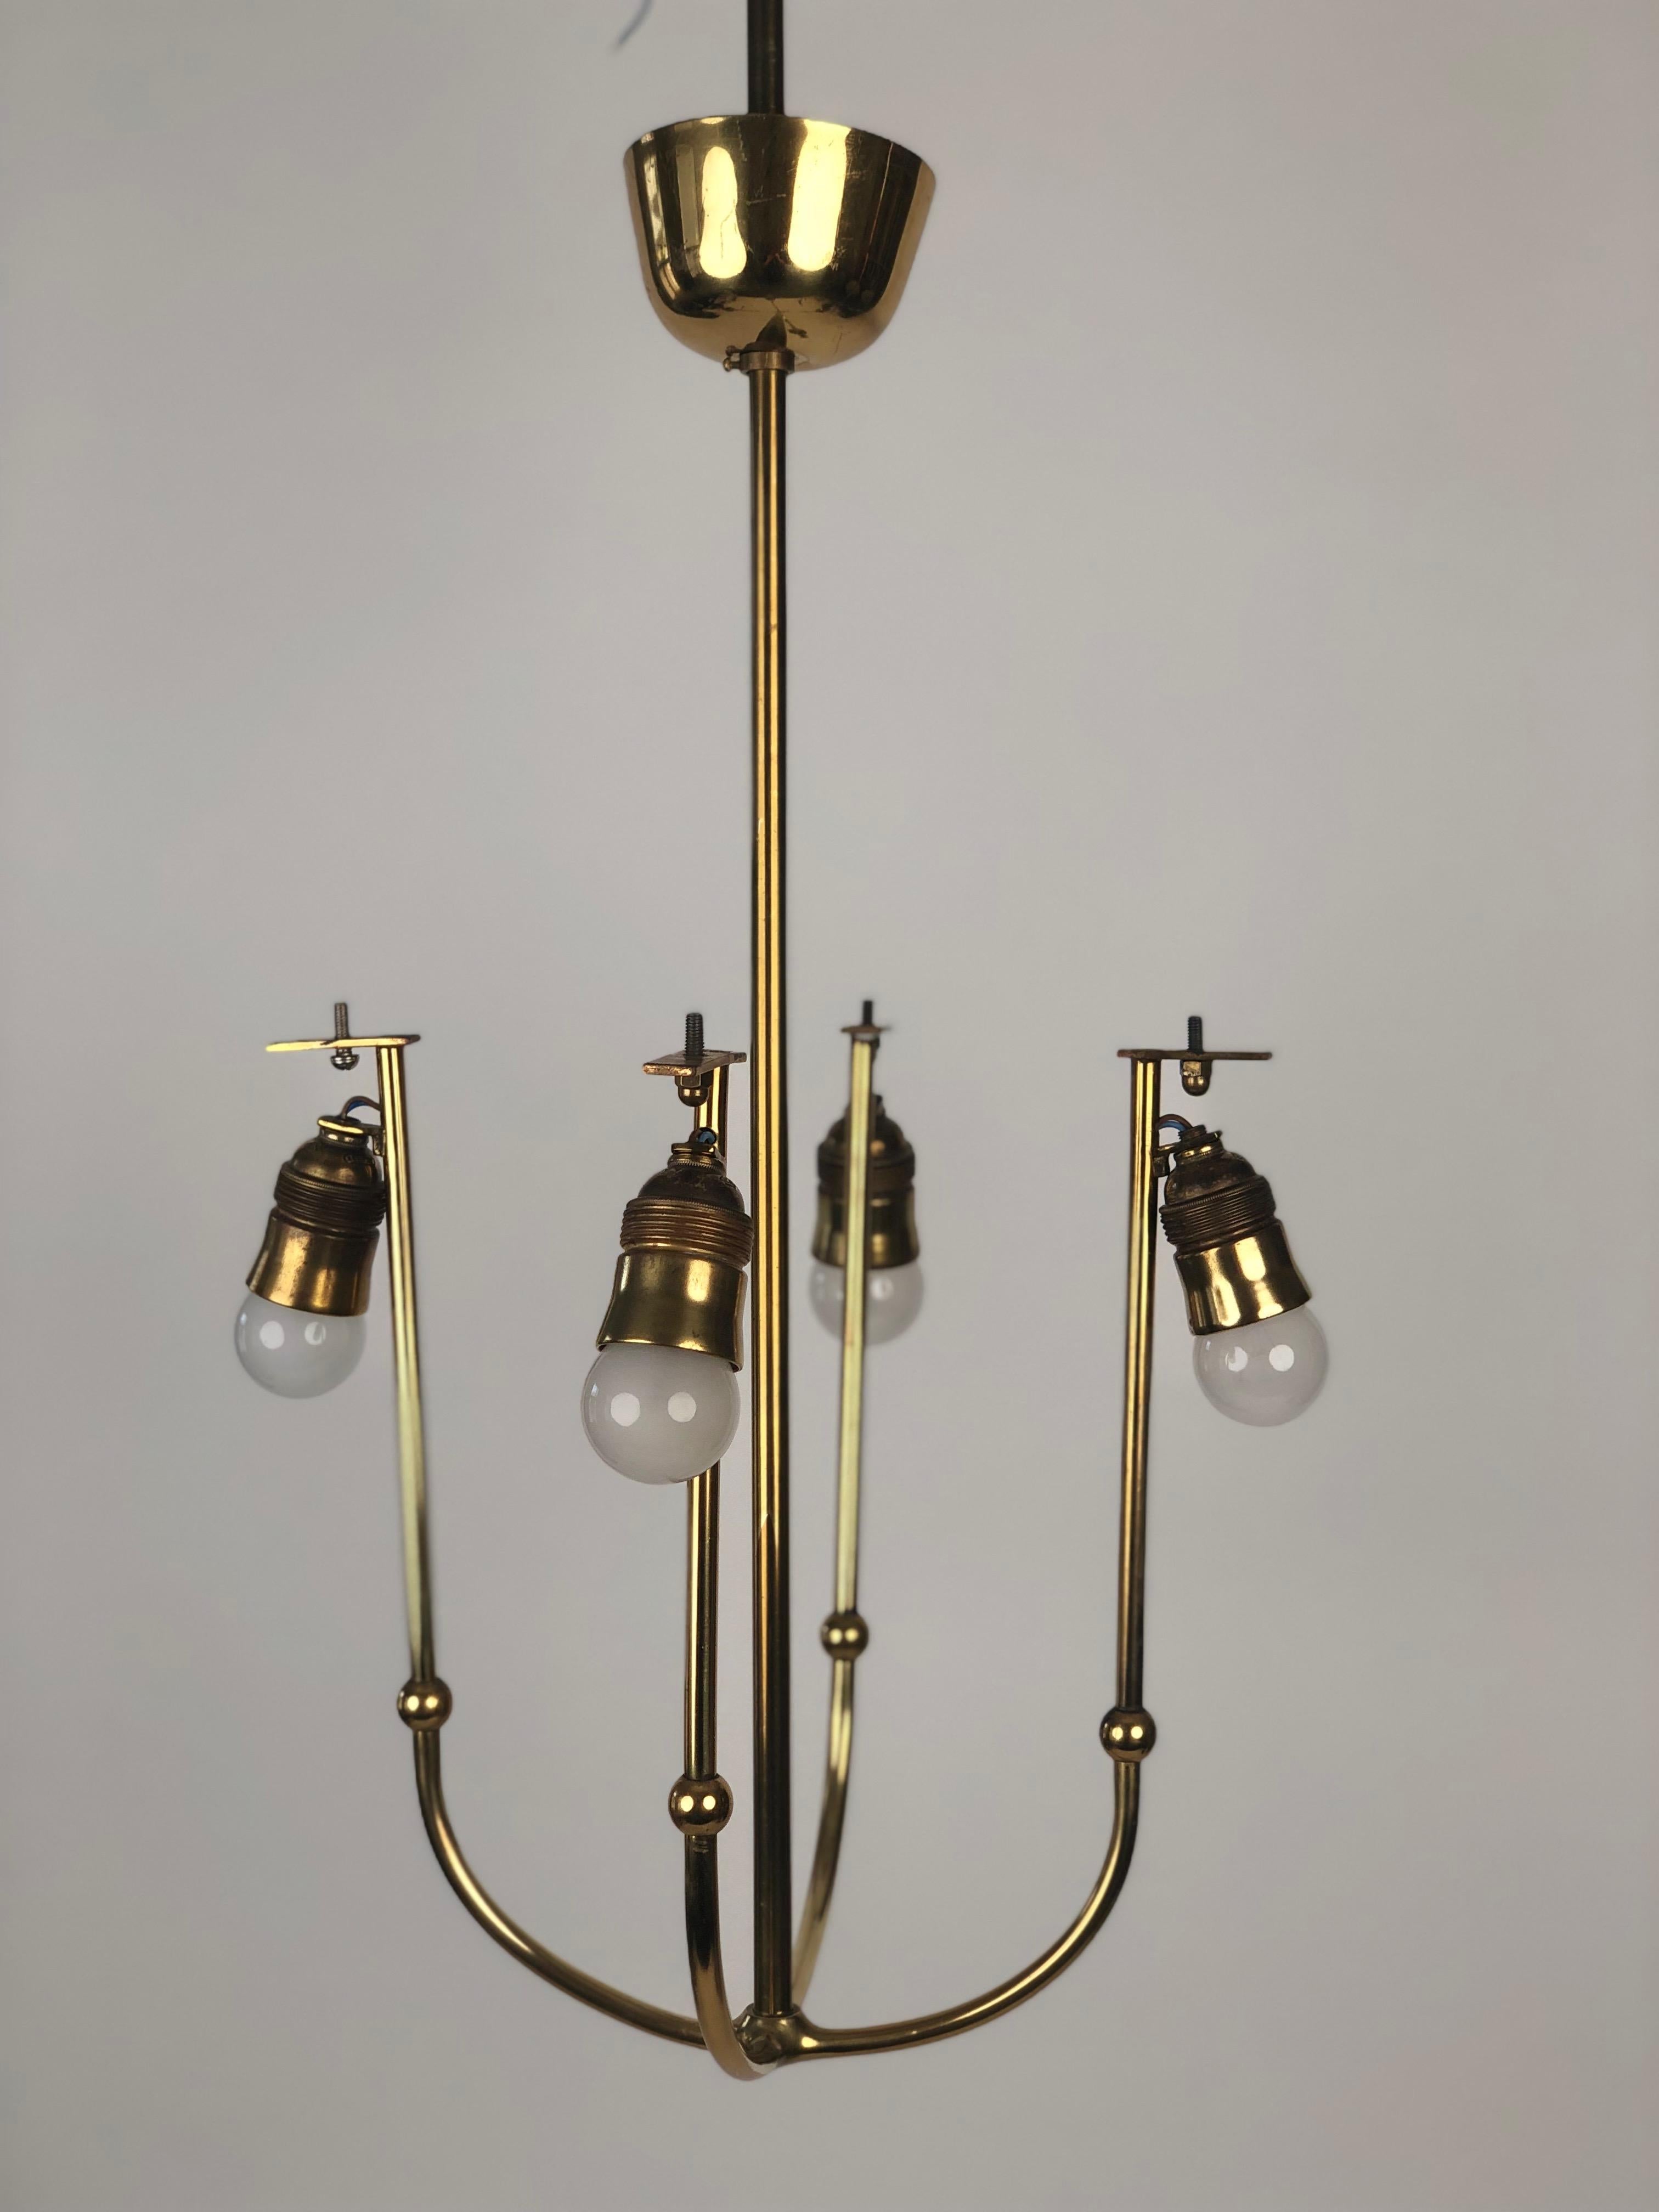 Four Arm Chandelier in Brass with Silk Shades , 1930's, Austria For Sale 10